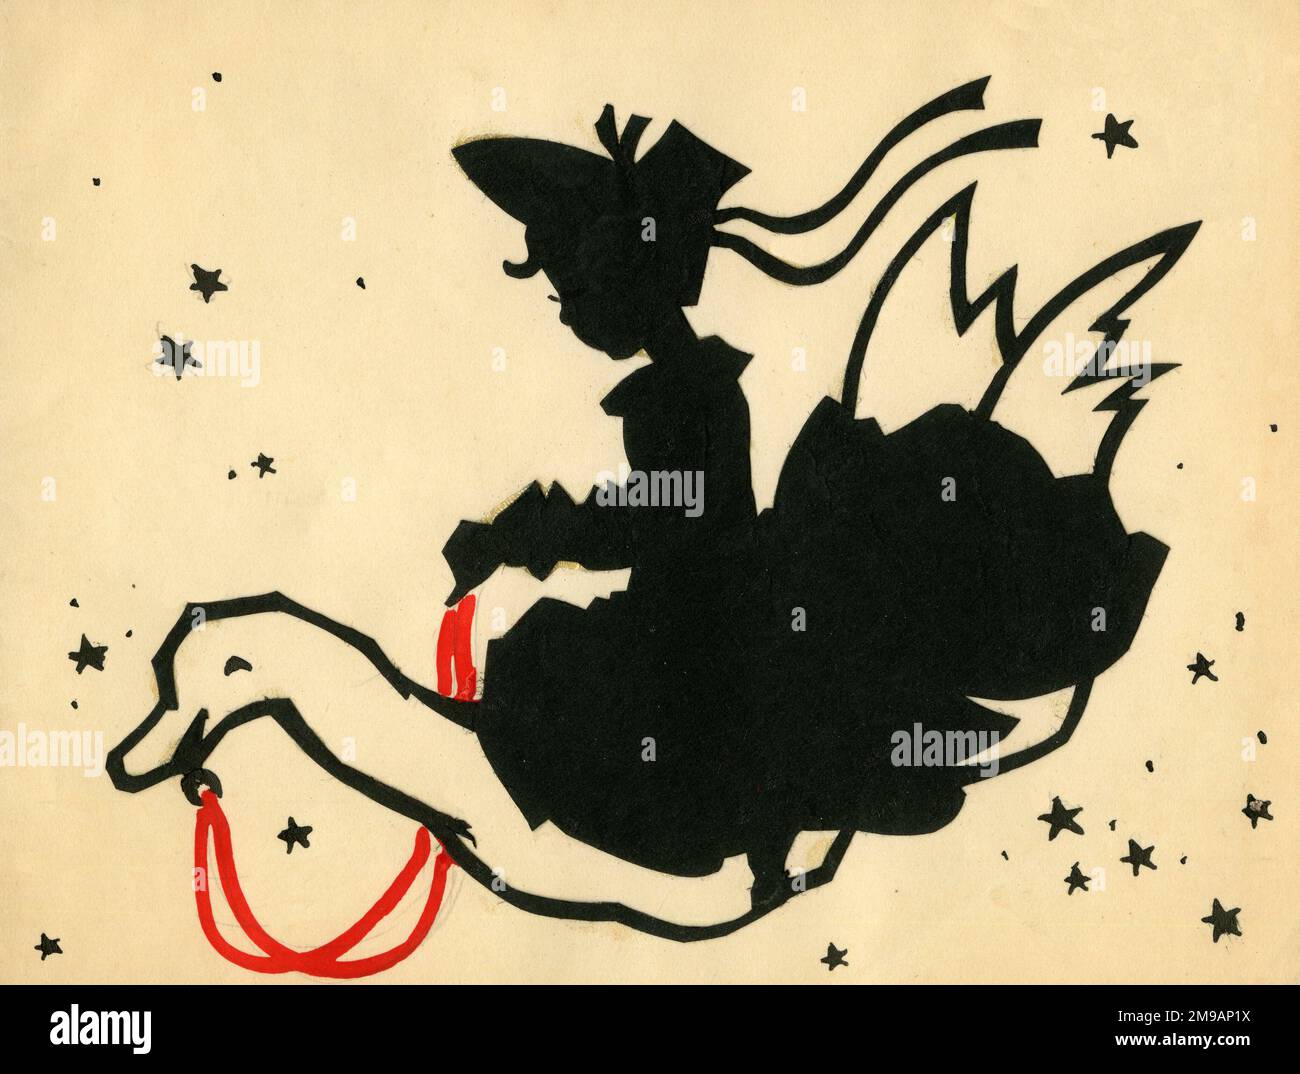 Original Artwork - Design for a silhouette Christmas card - Greetings from the Nursery Folk - Mother Goose.  (1 of 2) Stock Photo